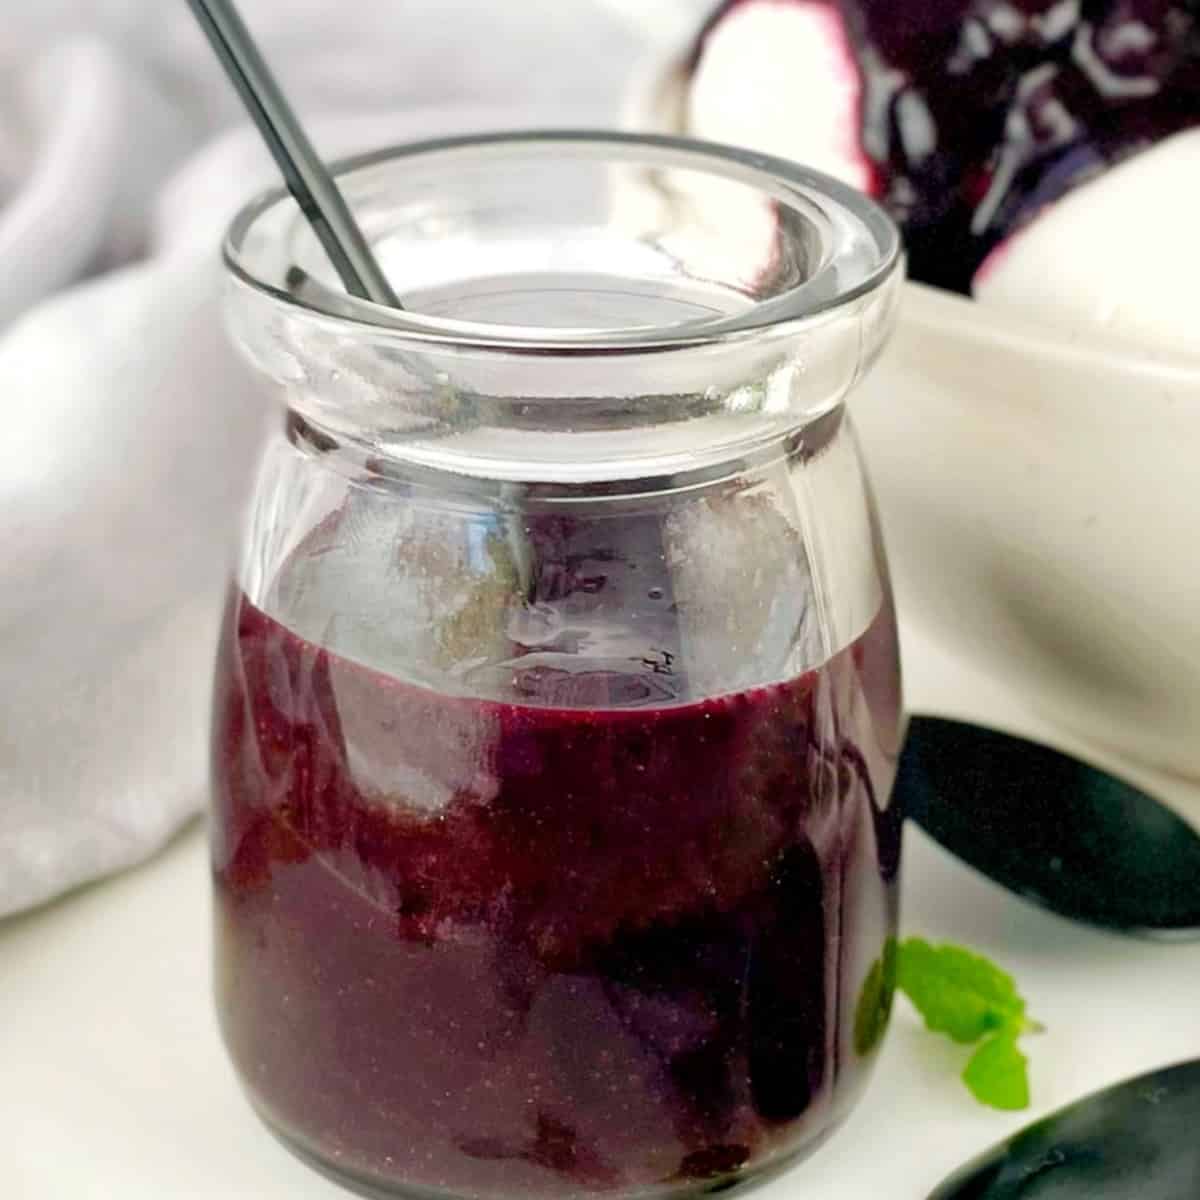 blueberry sauce in a glass jar on a white plate with a spoon and a sprig of mint.